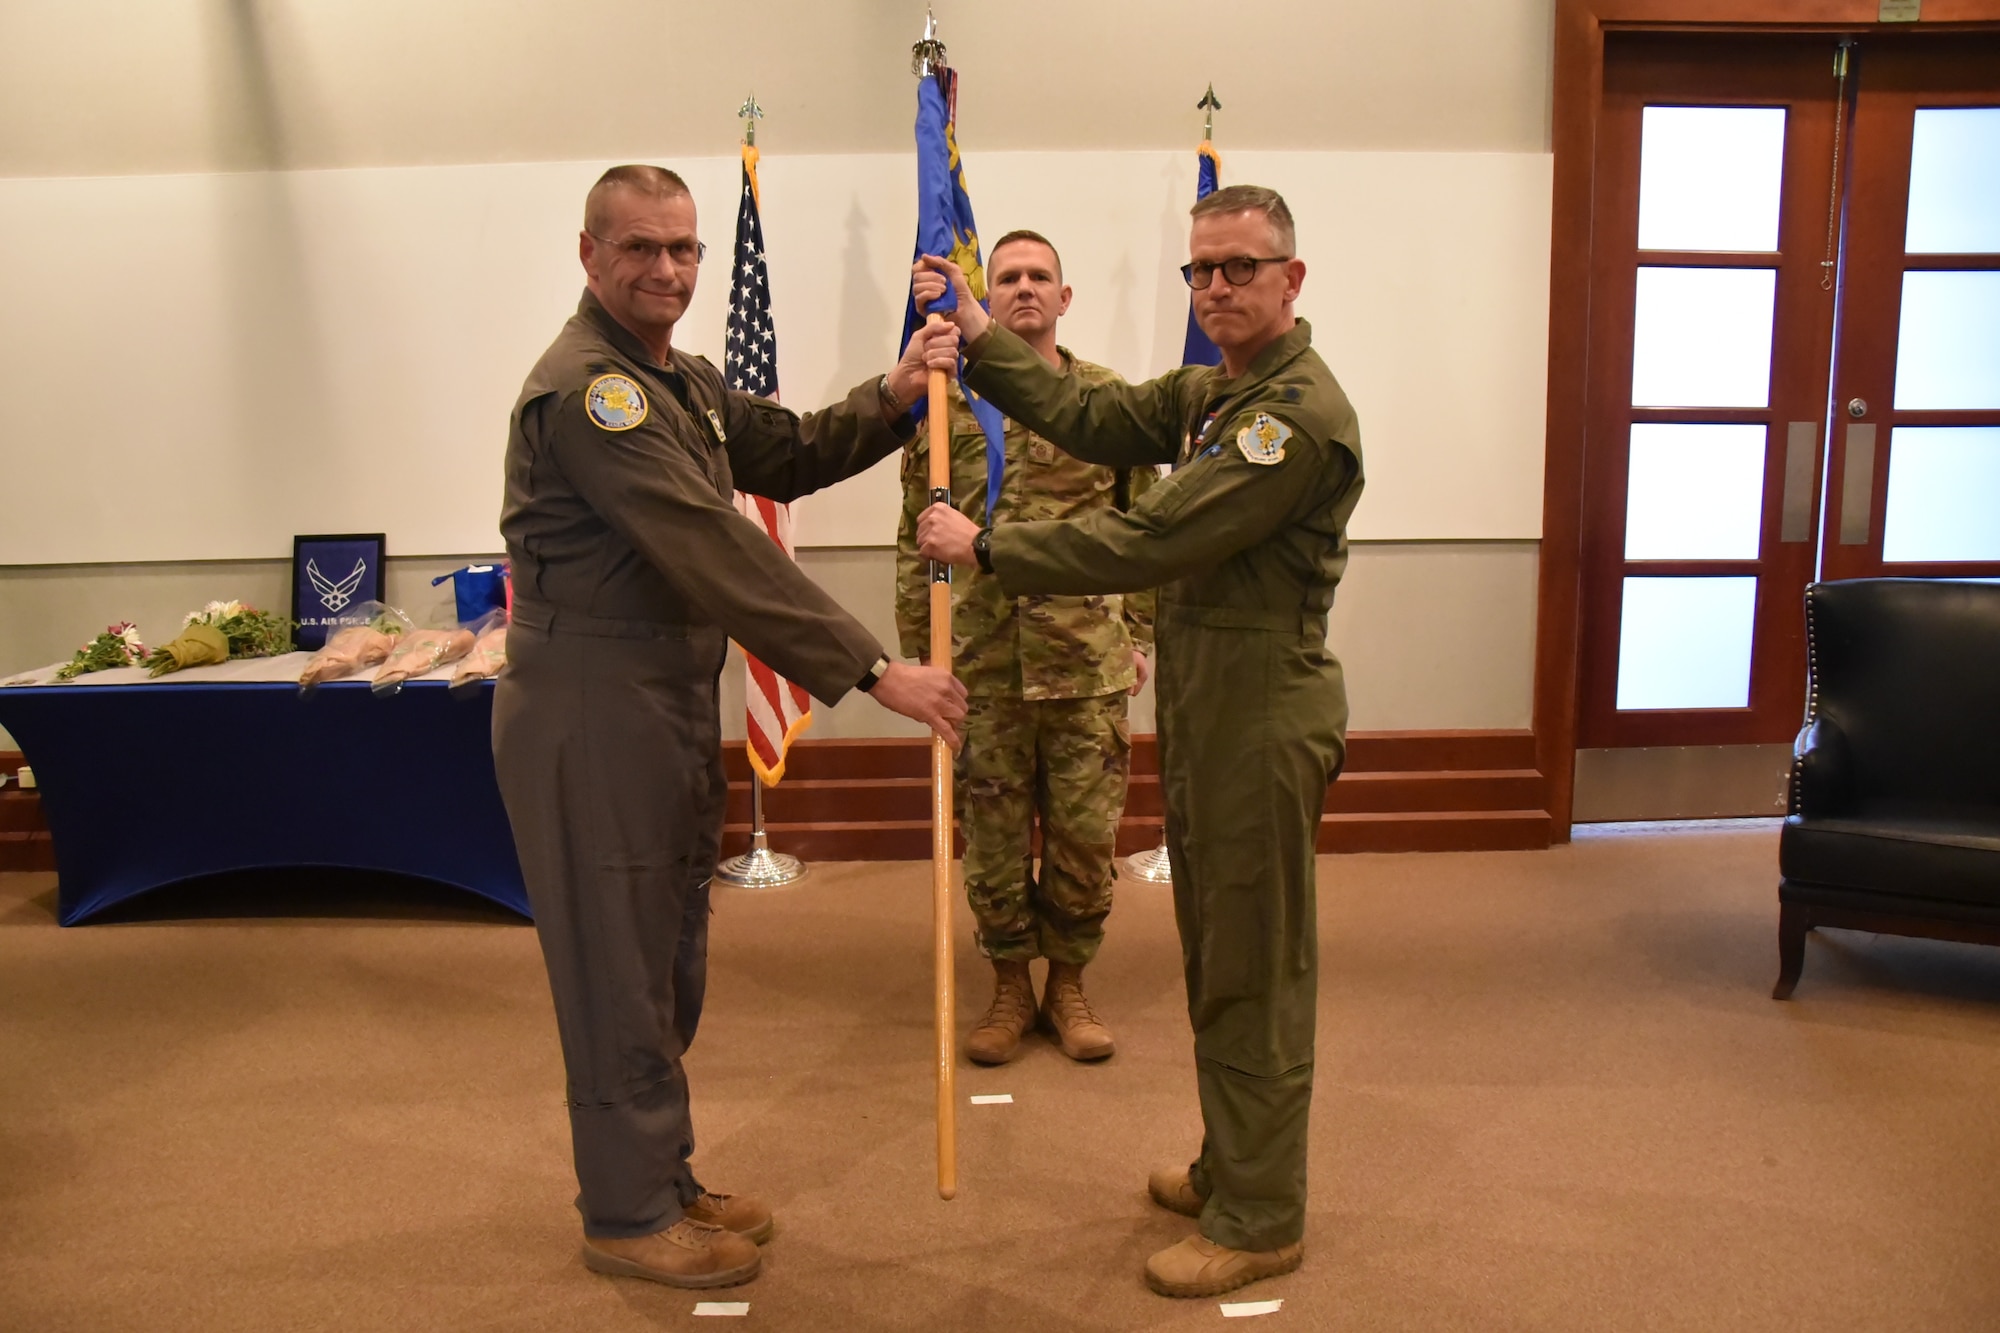 (Left to right) Lt. Col. Hendrikus "Dutch" Vanderveldt, incoming 931st Aerospace Medicine Squadron commander, receives the guidon from Col. Phil Heseltine, 931st Air Refueling Wing commander, at Bleckley Lounge.